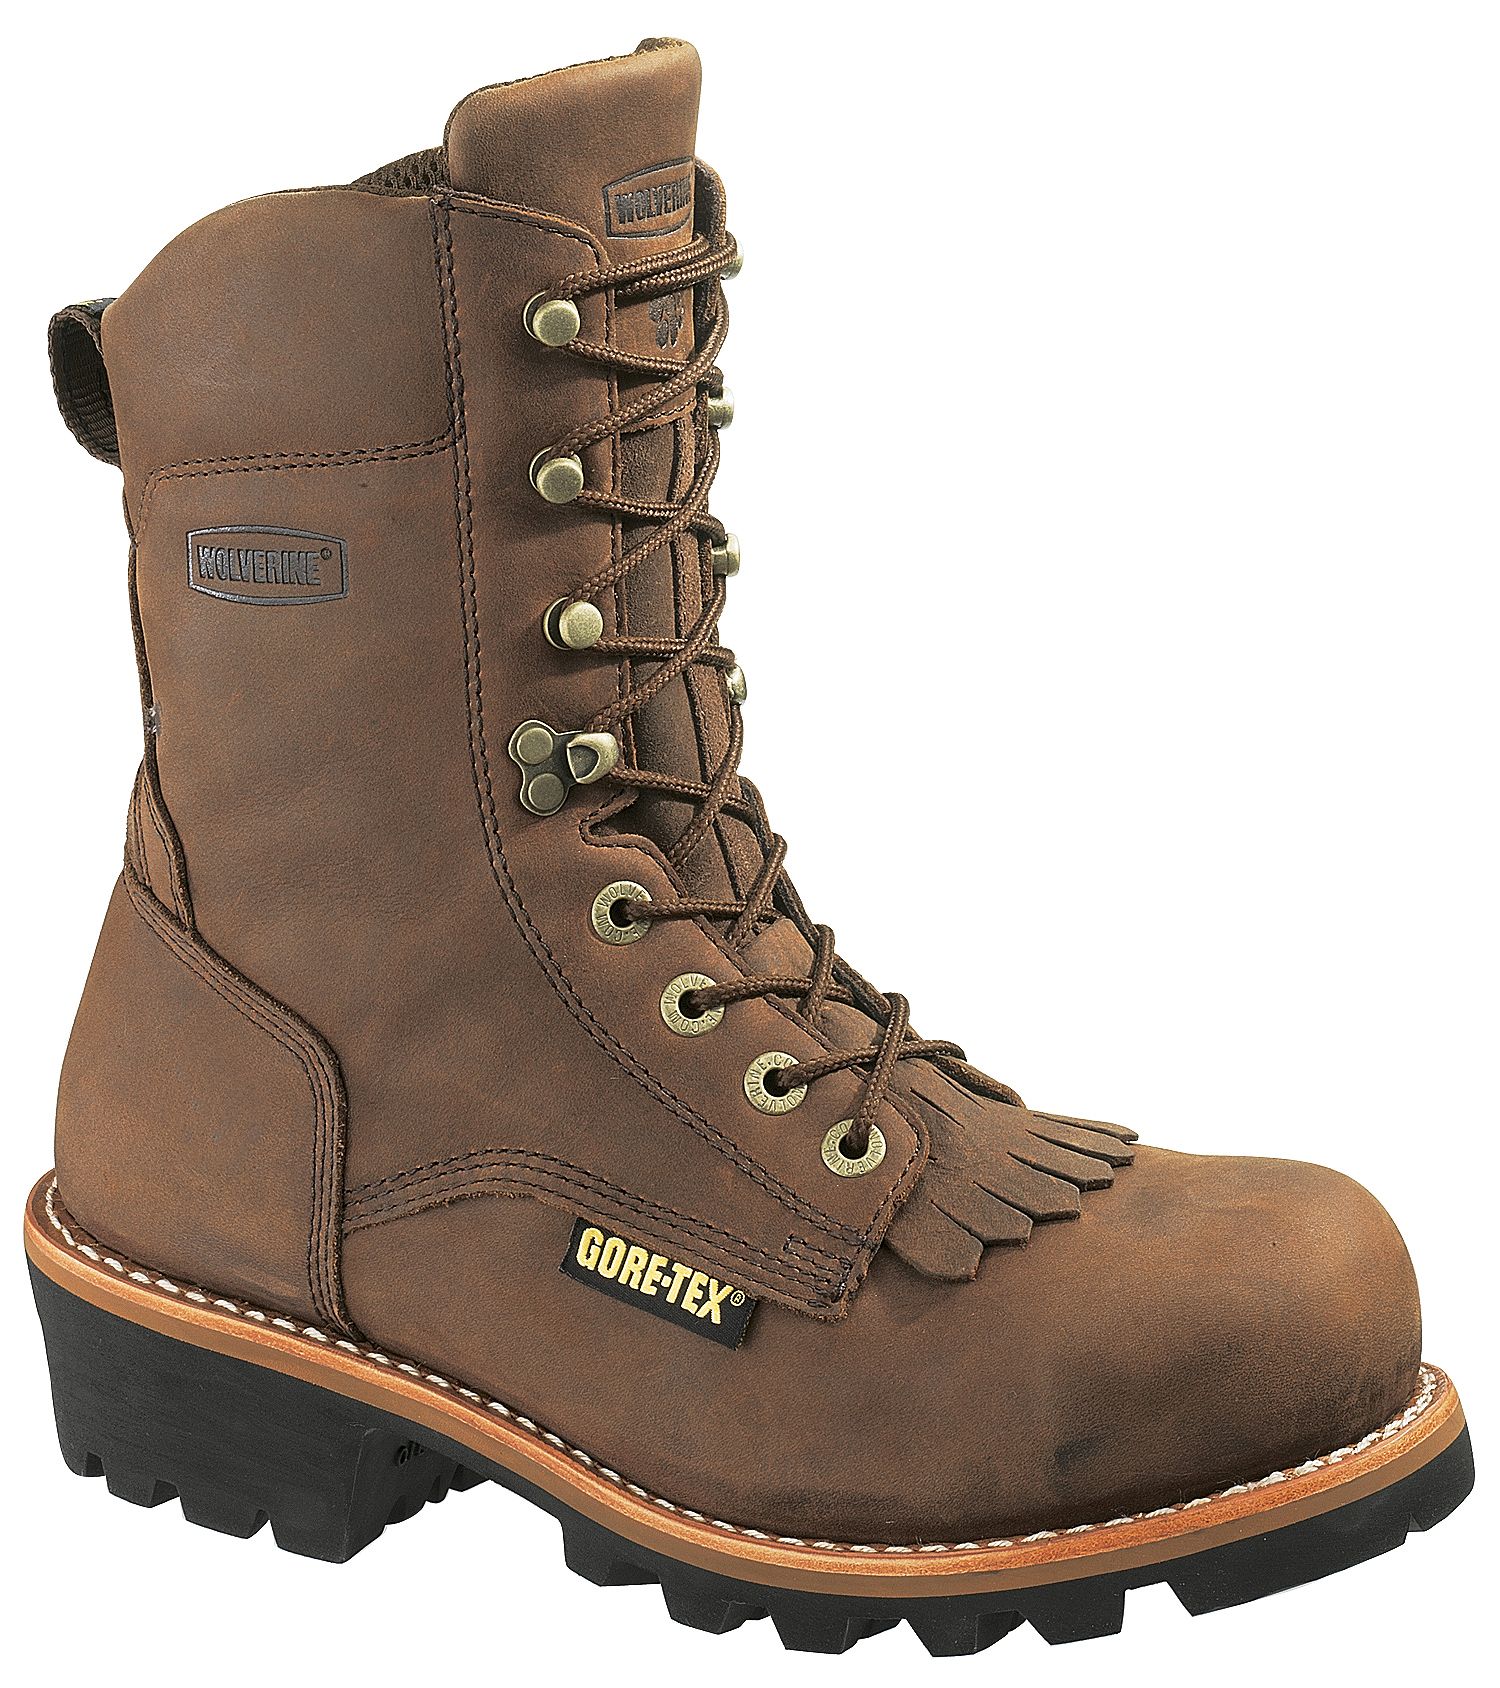 Insulated Work Boots & Winter Work Boots - Sheplers